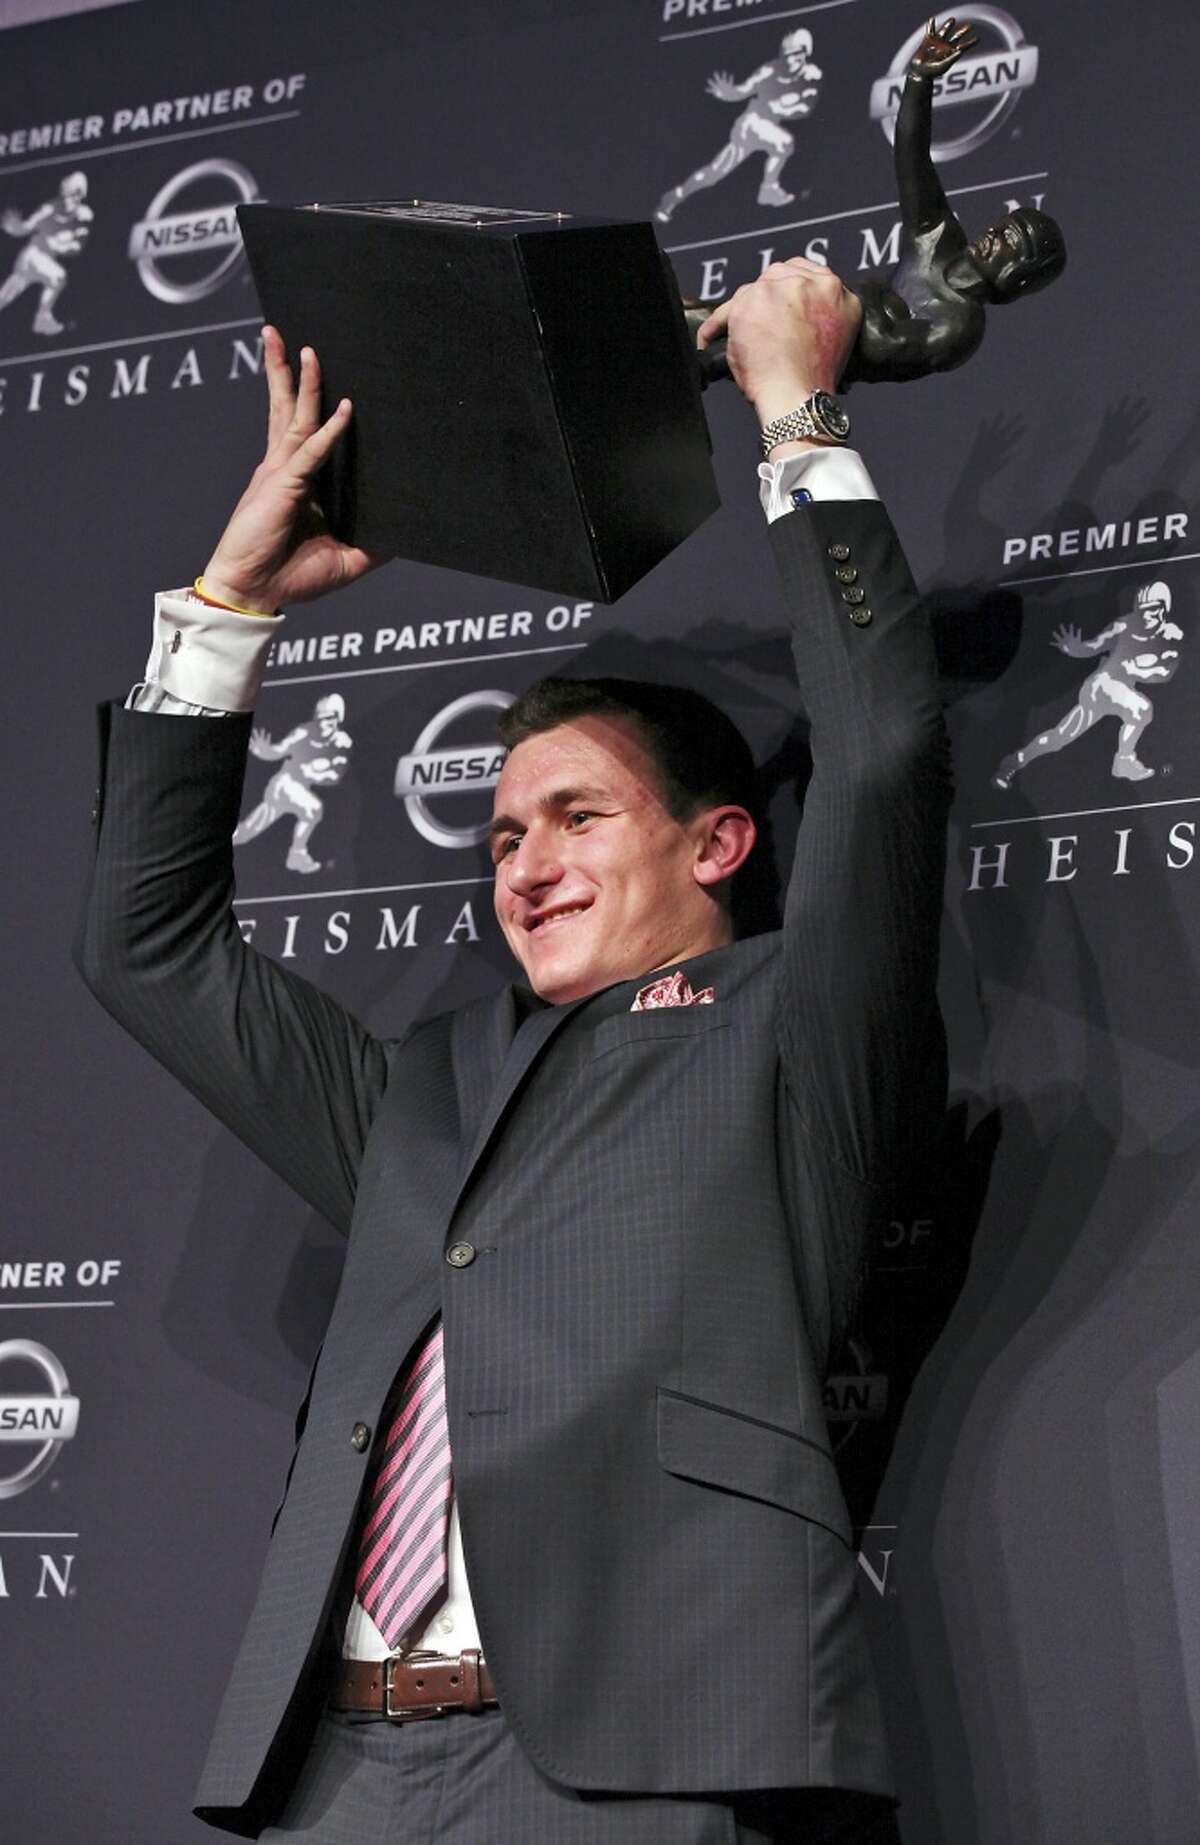 Texas A&M's quarterback Johnny Manziel, the 2012 Heisman Trophy winner, poses for photos during a press conference Saturday Dec. 8, 2012 at the New York Marriott Marquis hotel in New York, New York.